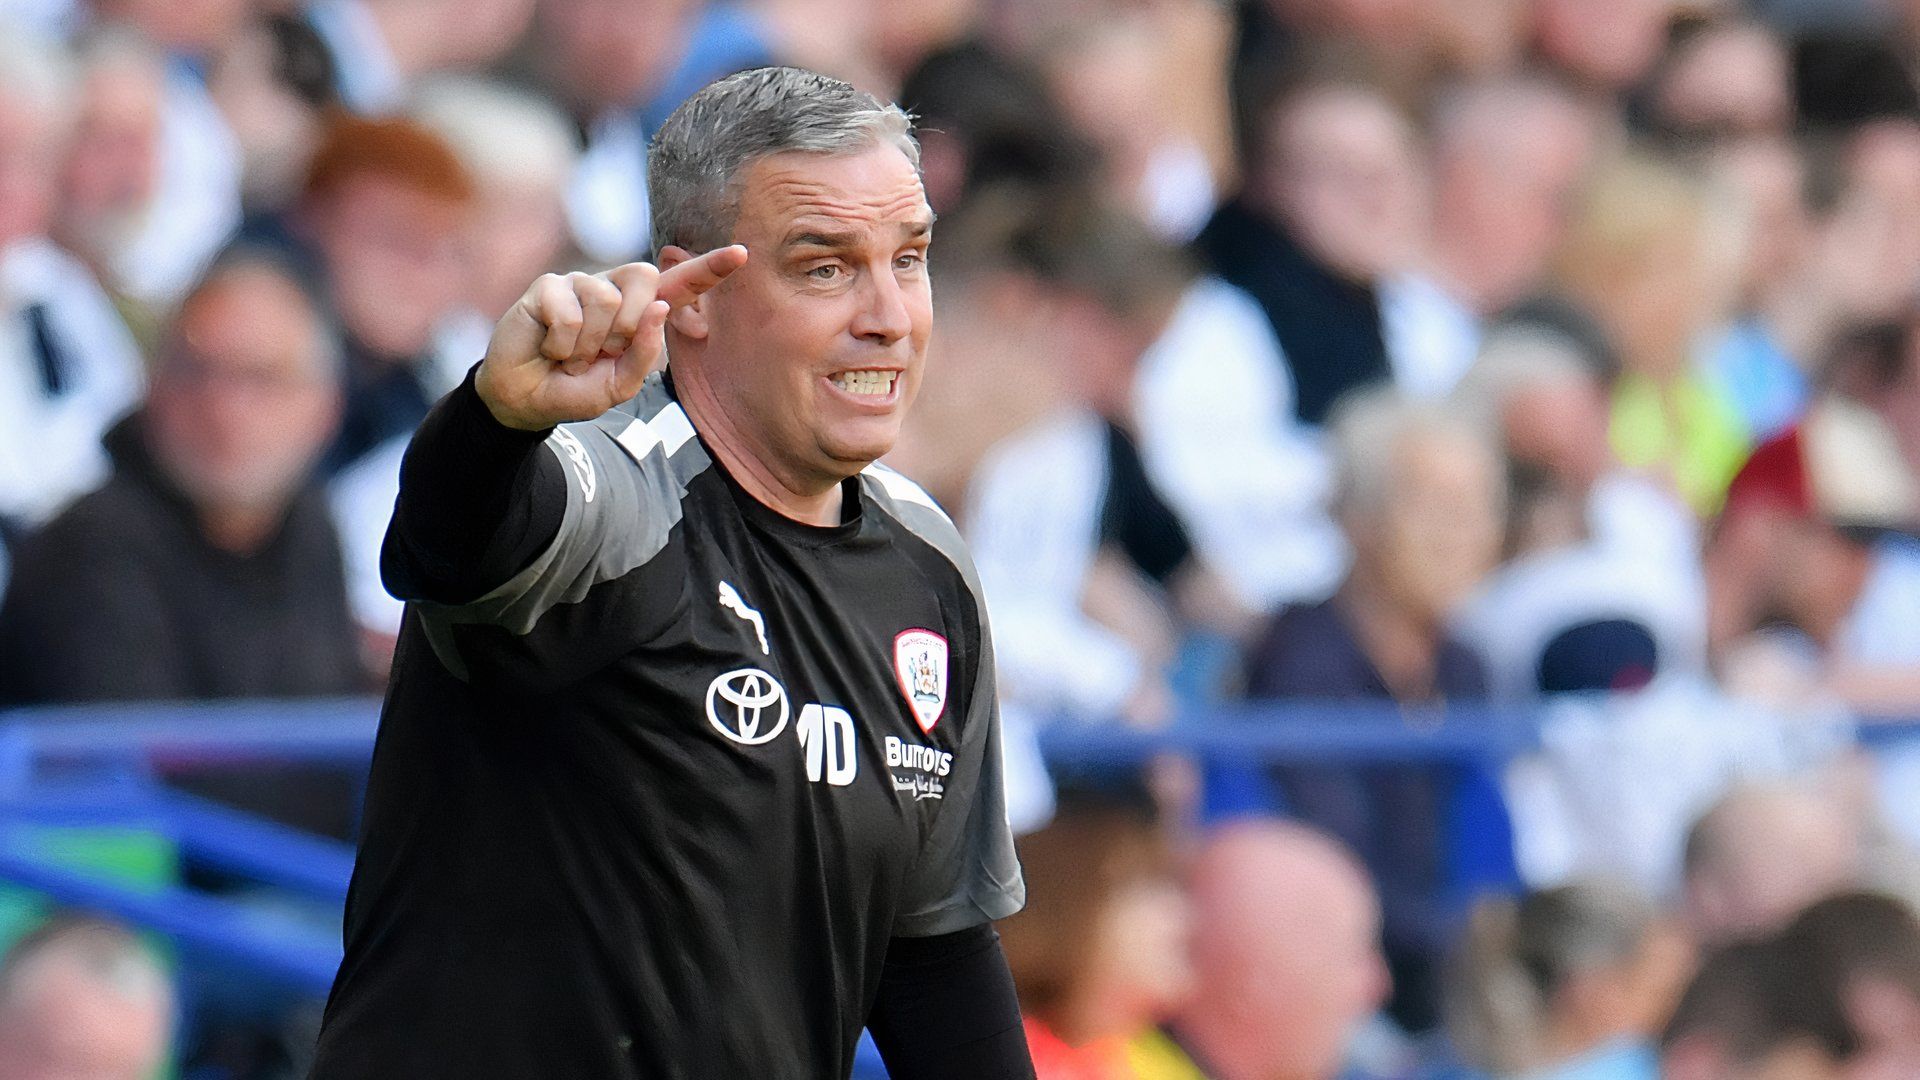 Huddersfield Town and Barnsley both keen on hiring Michael Duff as manager